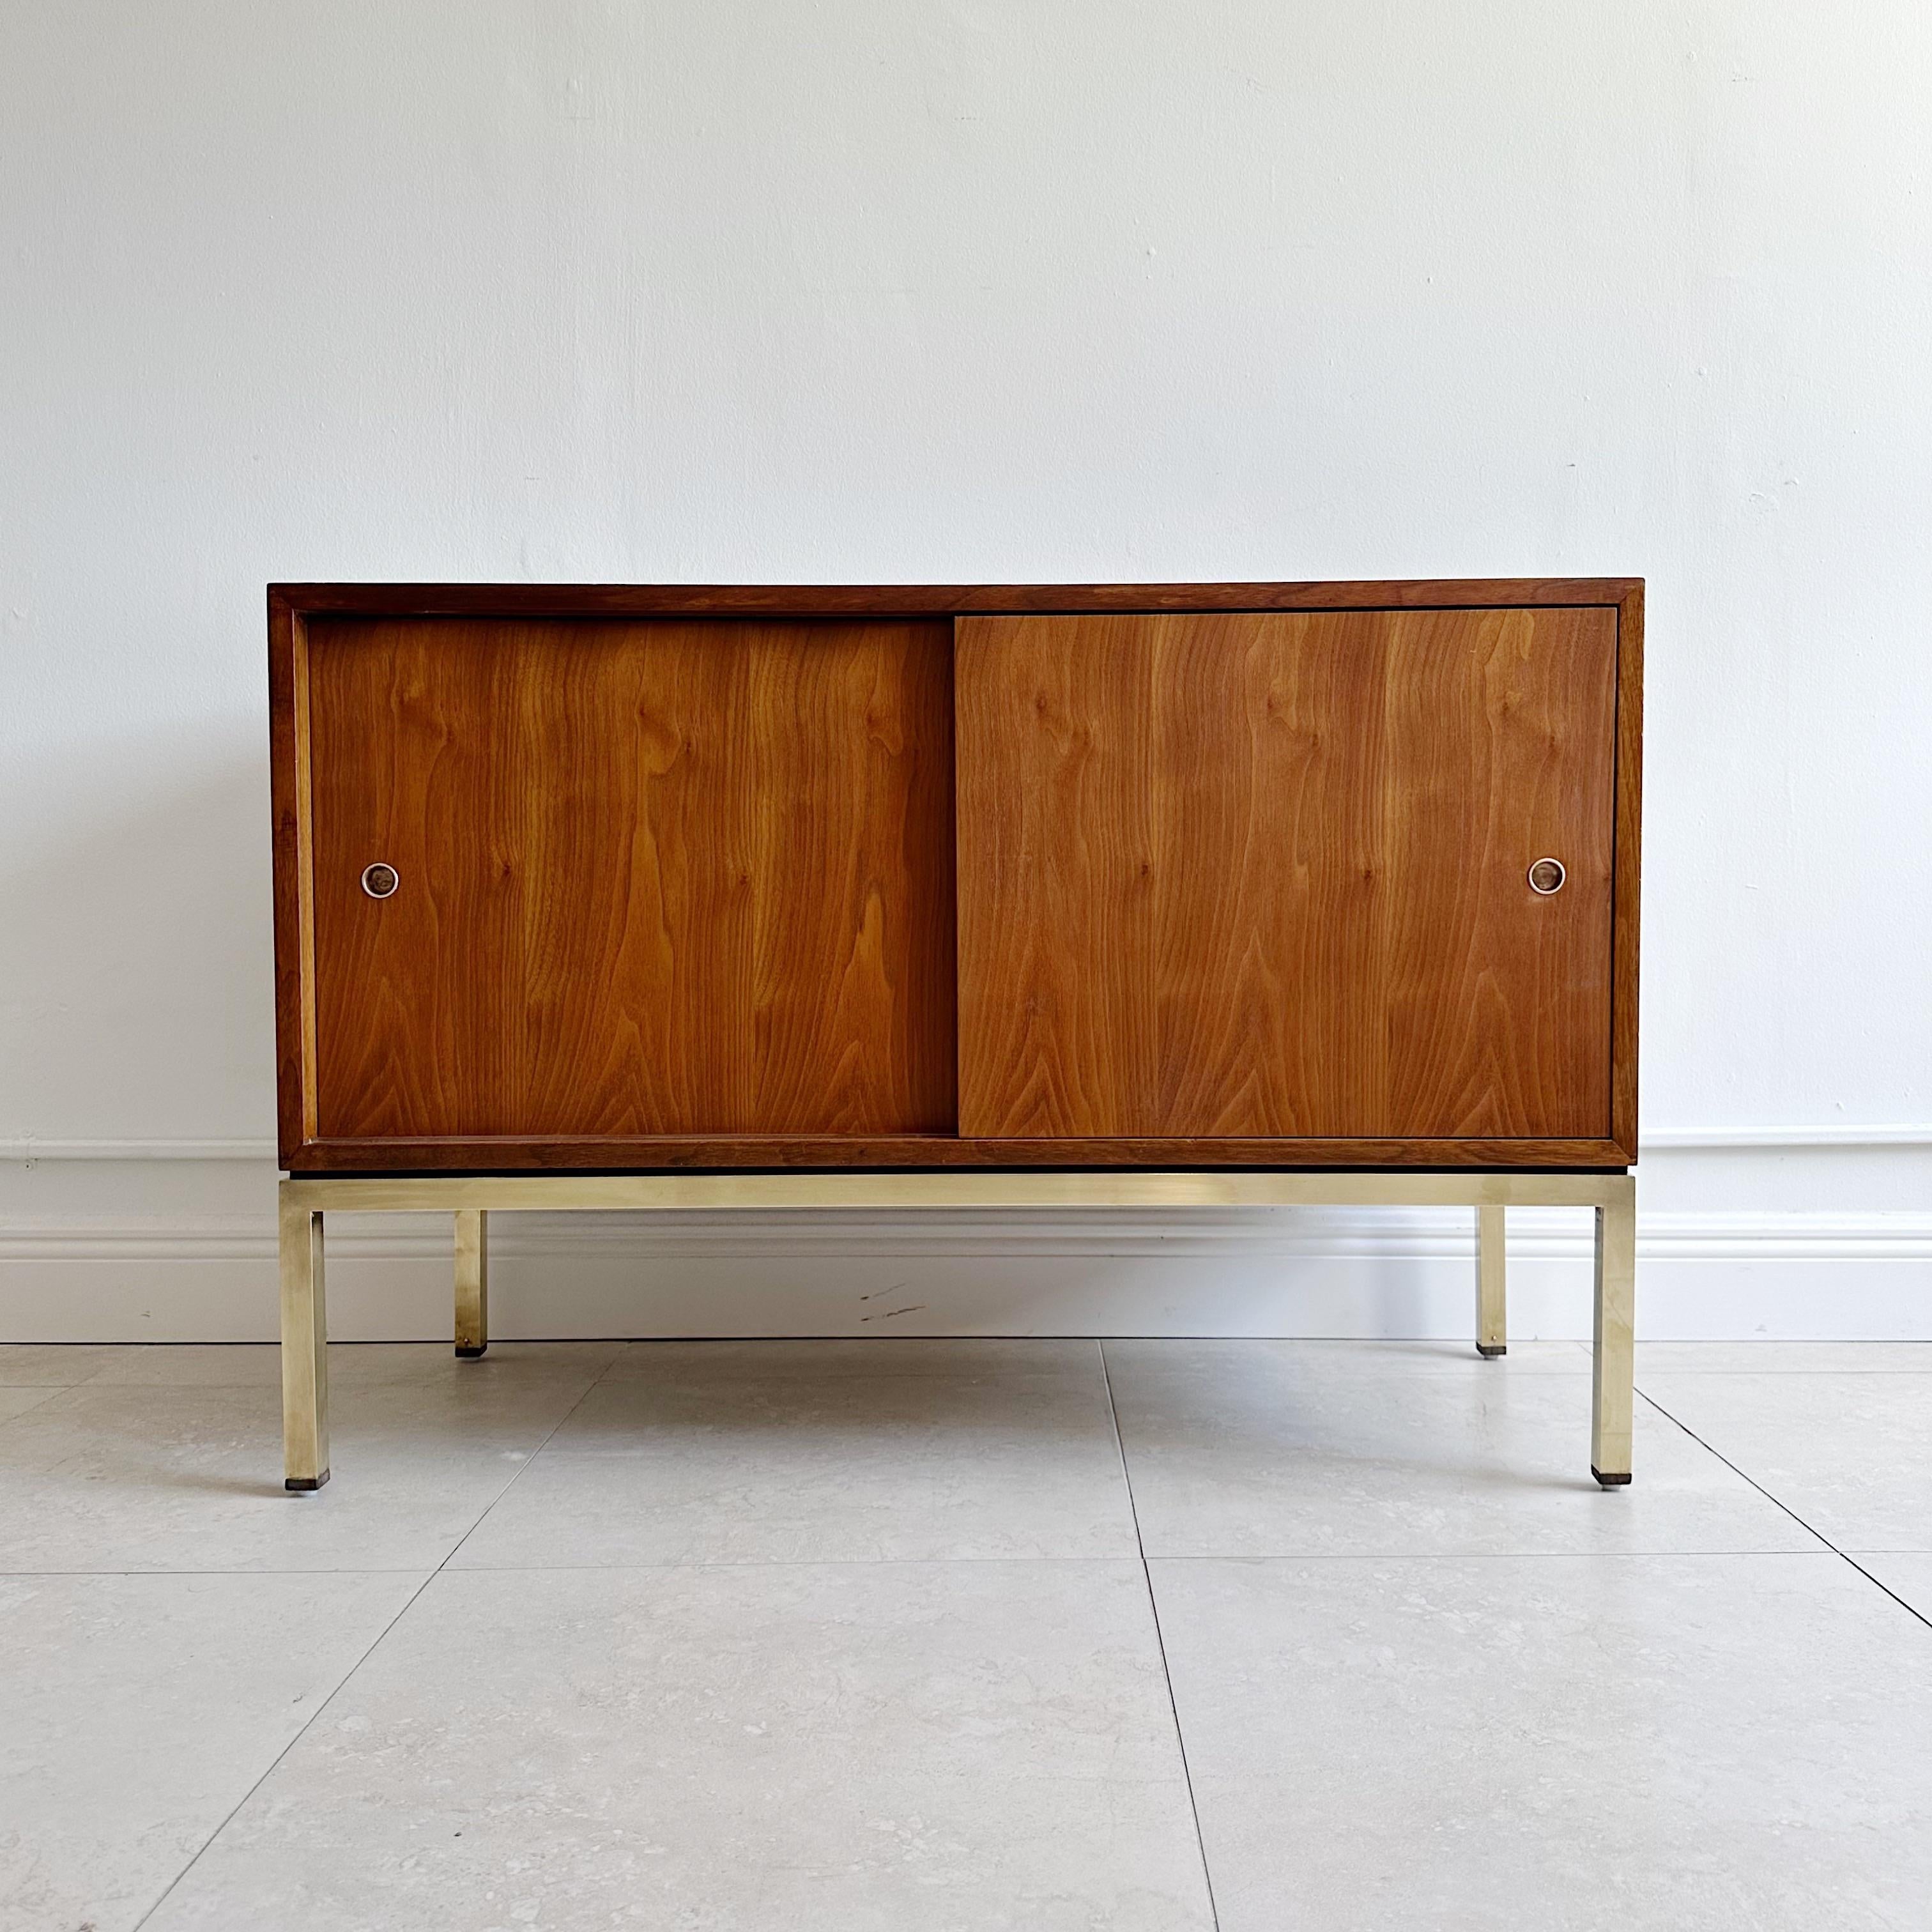 Edward Wormley solid walnut cased cabinet with two sliding doors supported on four legged brass frame with walnut caps on the feet. Original Dunbar label on the back. 